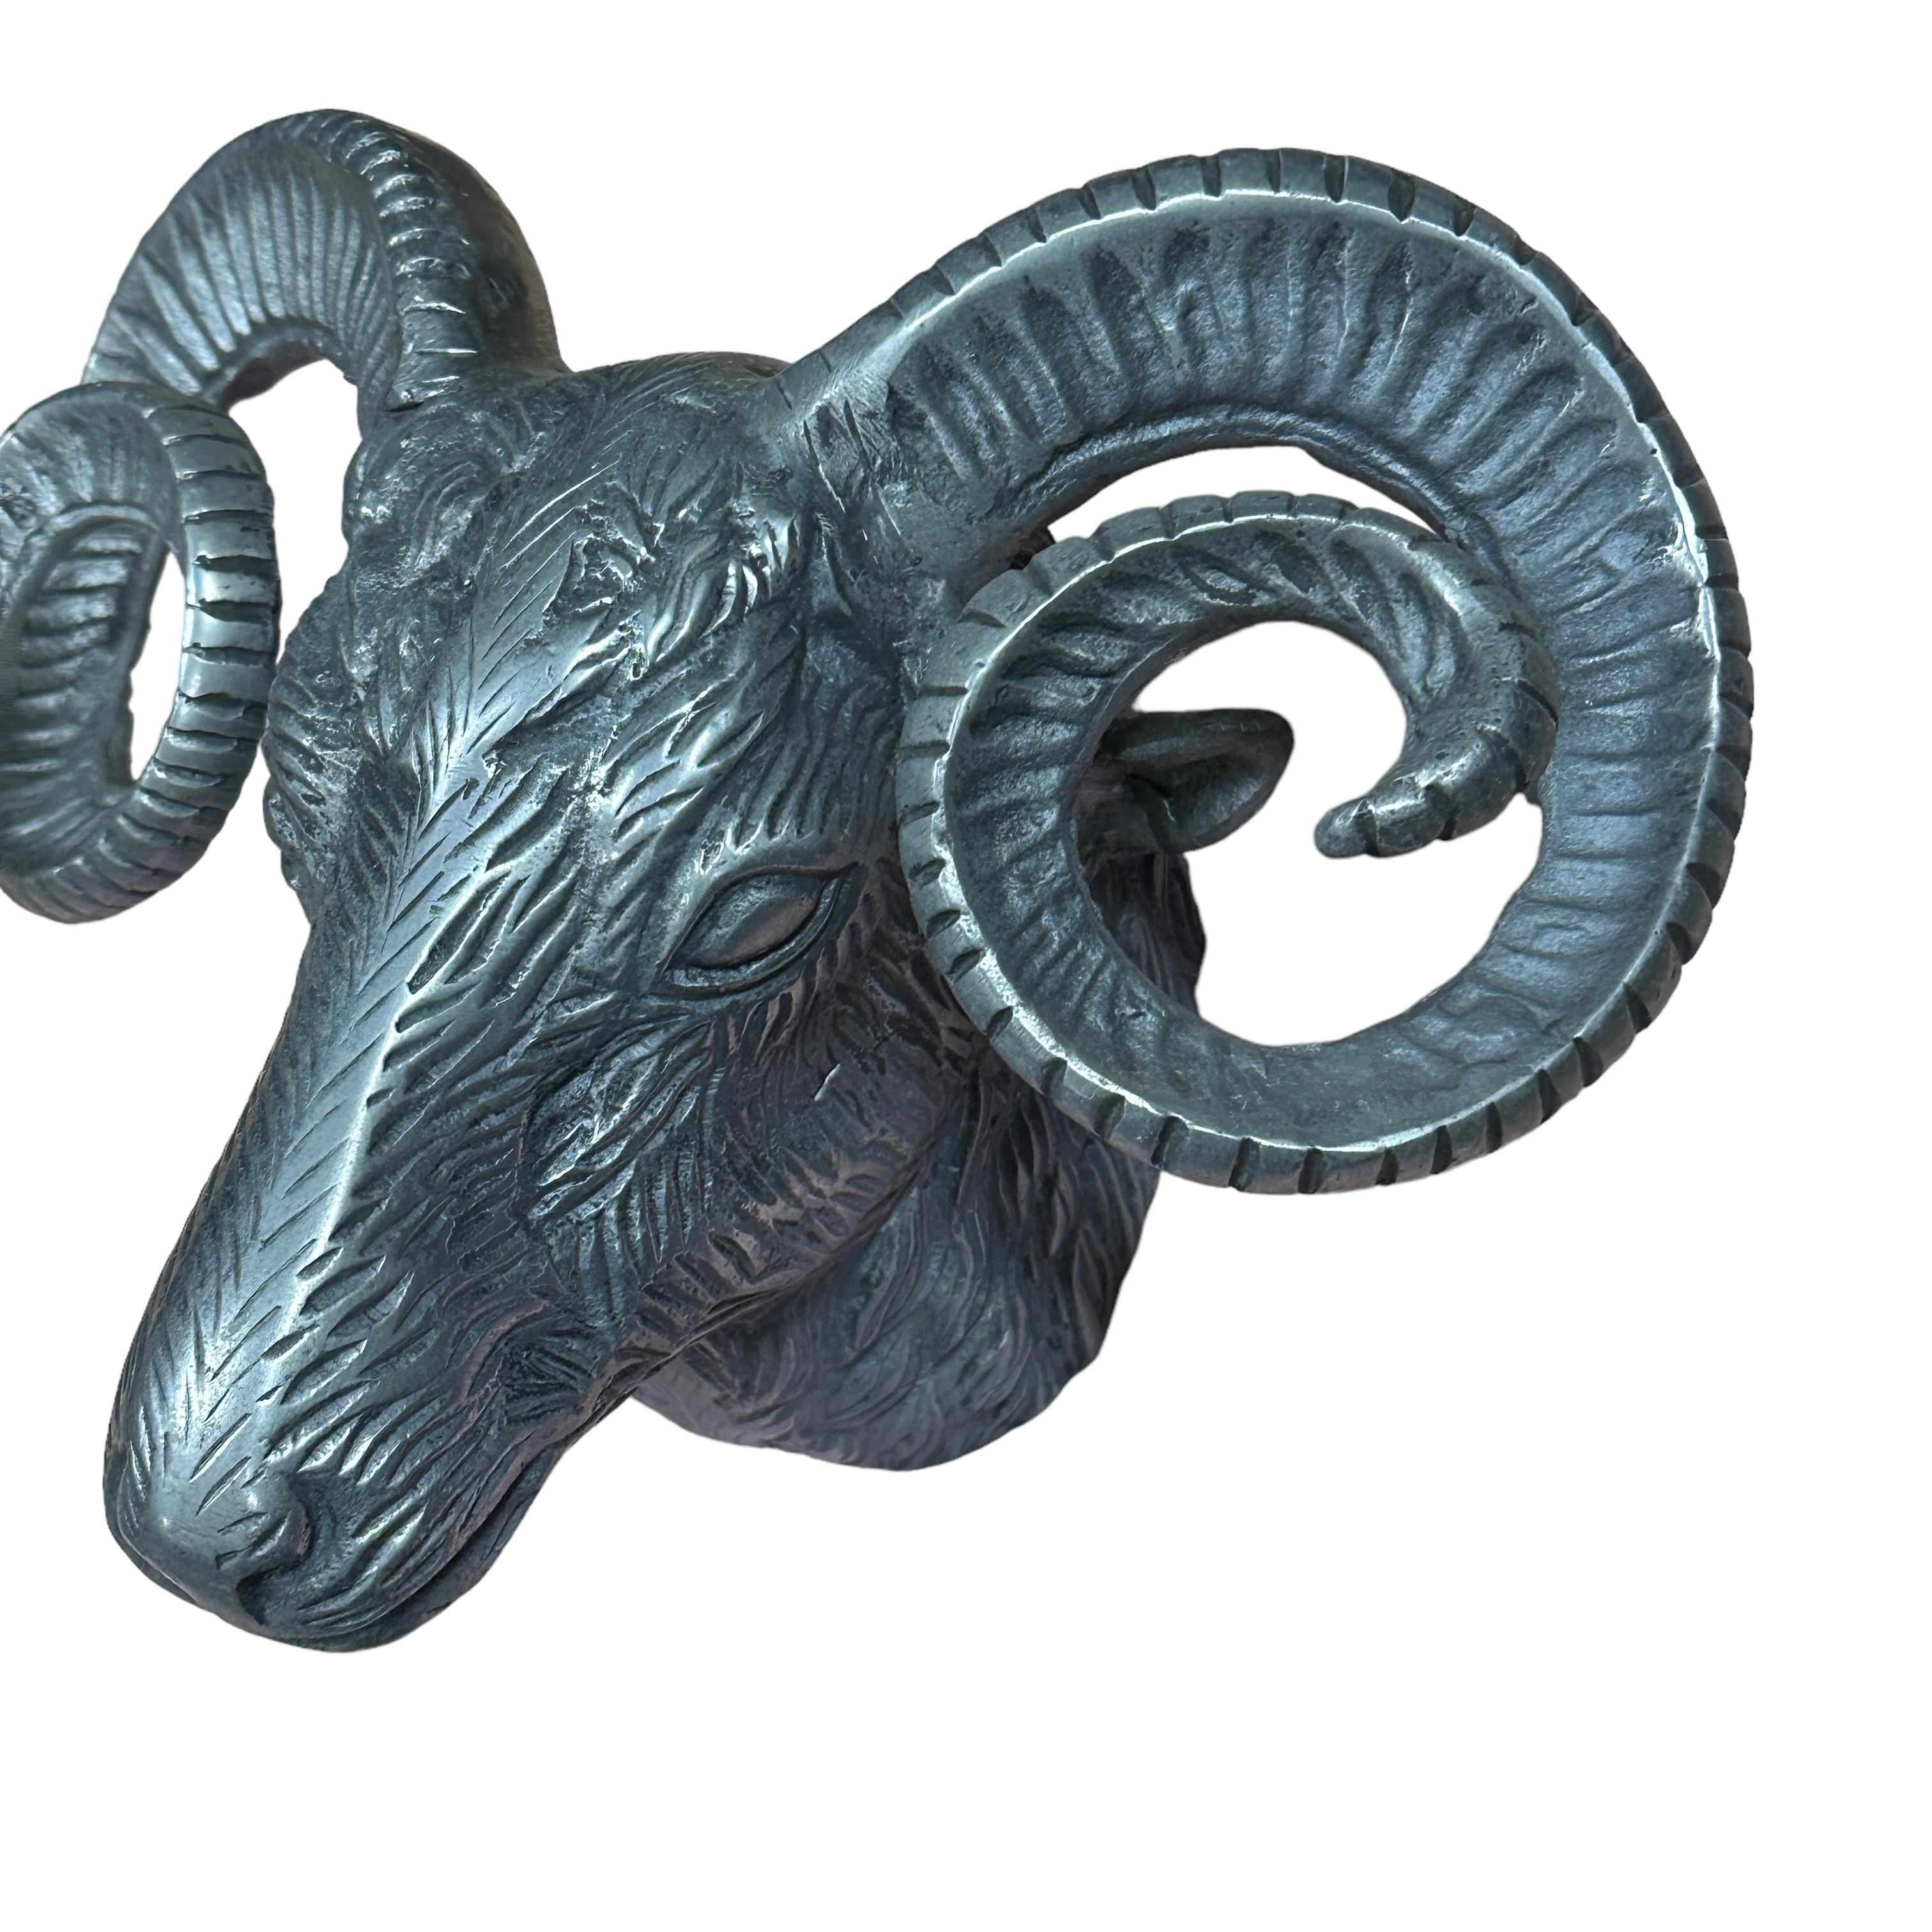 A great looking Ram head wall decoration. Bring a touch of Opulence into your home with this aluminum, wall mountable Ram head. This head has an industrial feel which would catch eyes in any living room or hallway. Made in the style of Arthur Court,